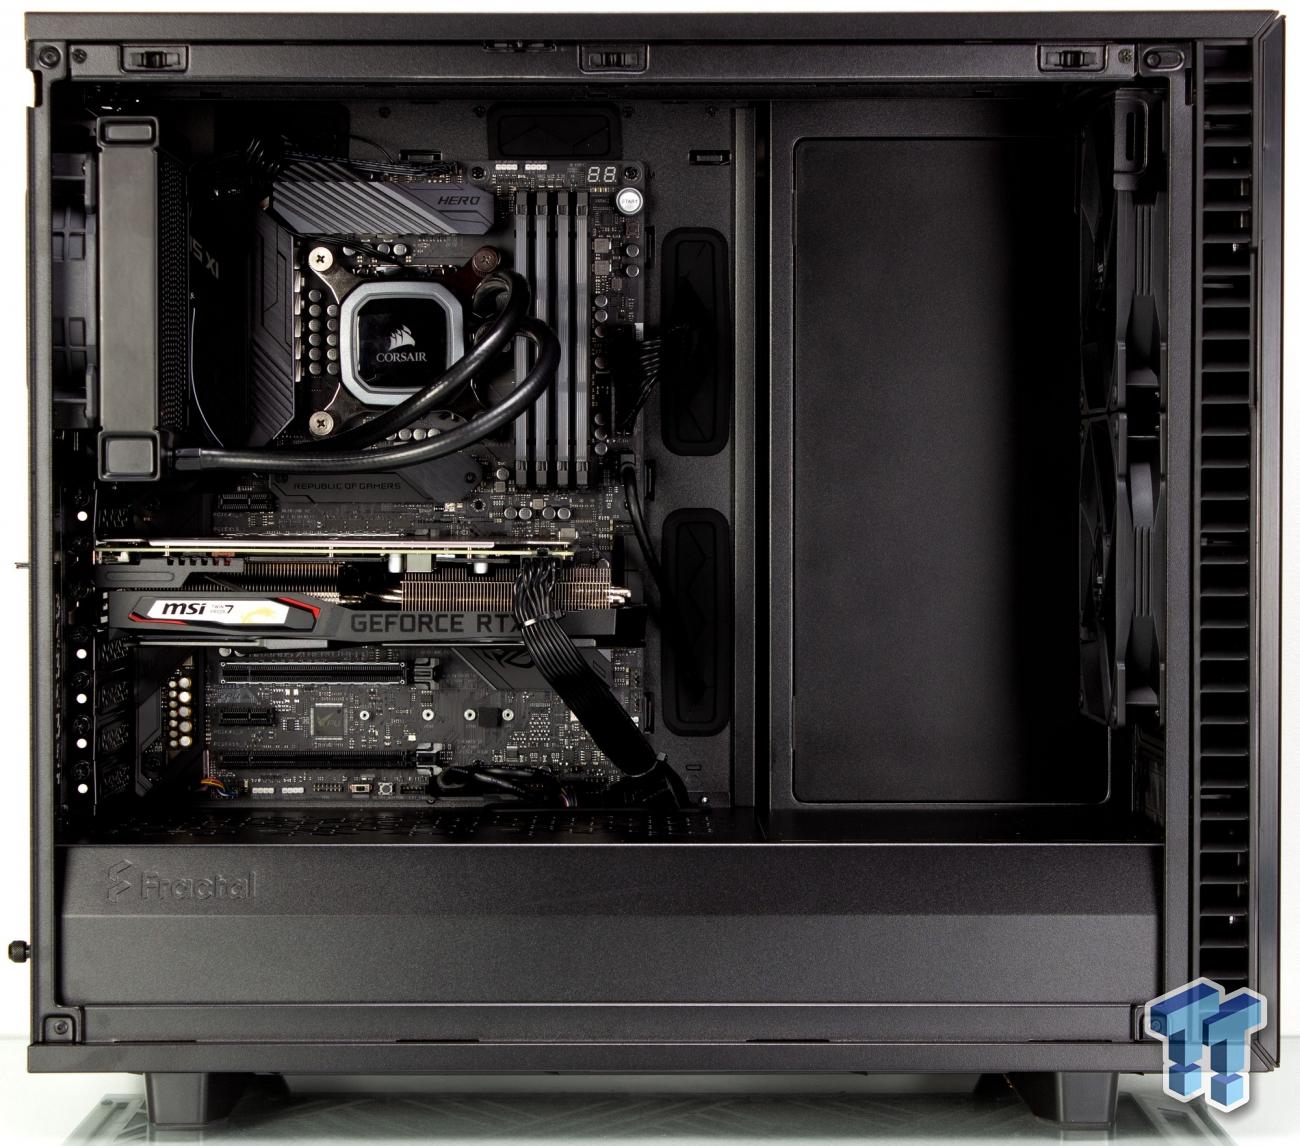 Fractal Design Define 7 Mid-Tower Chassis Review